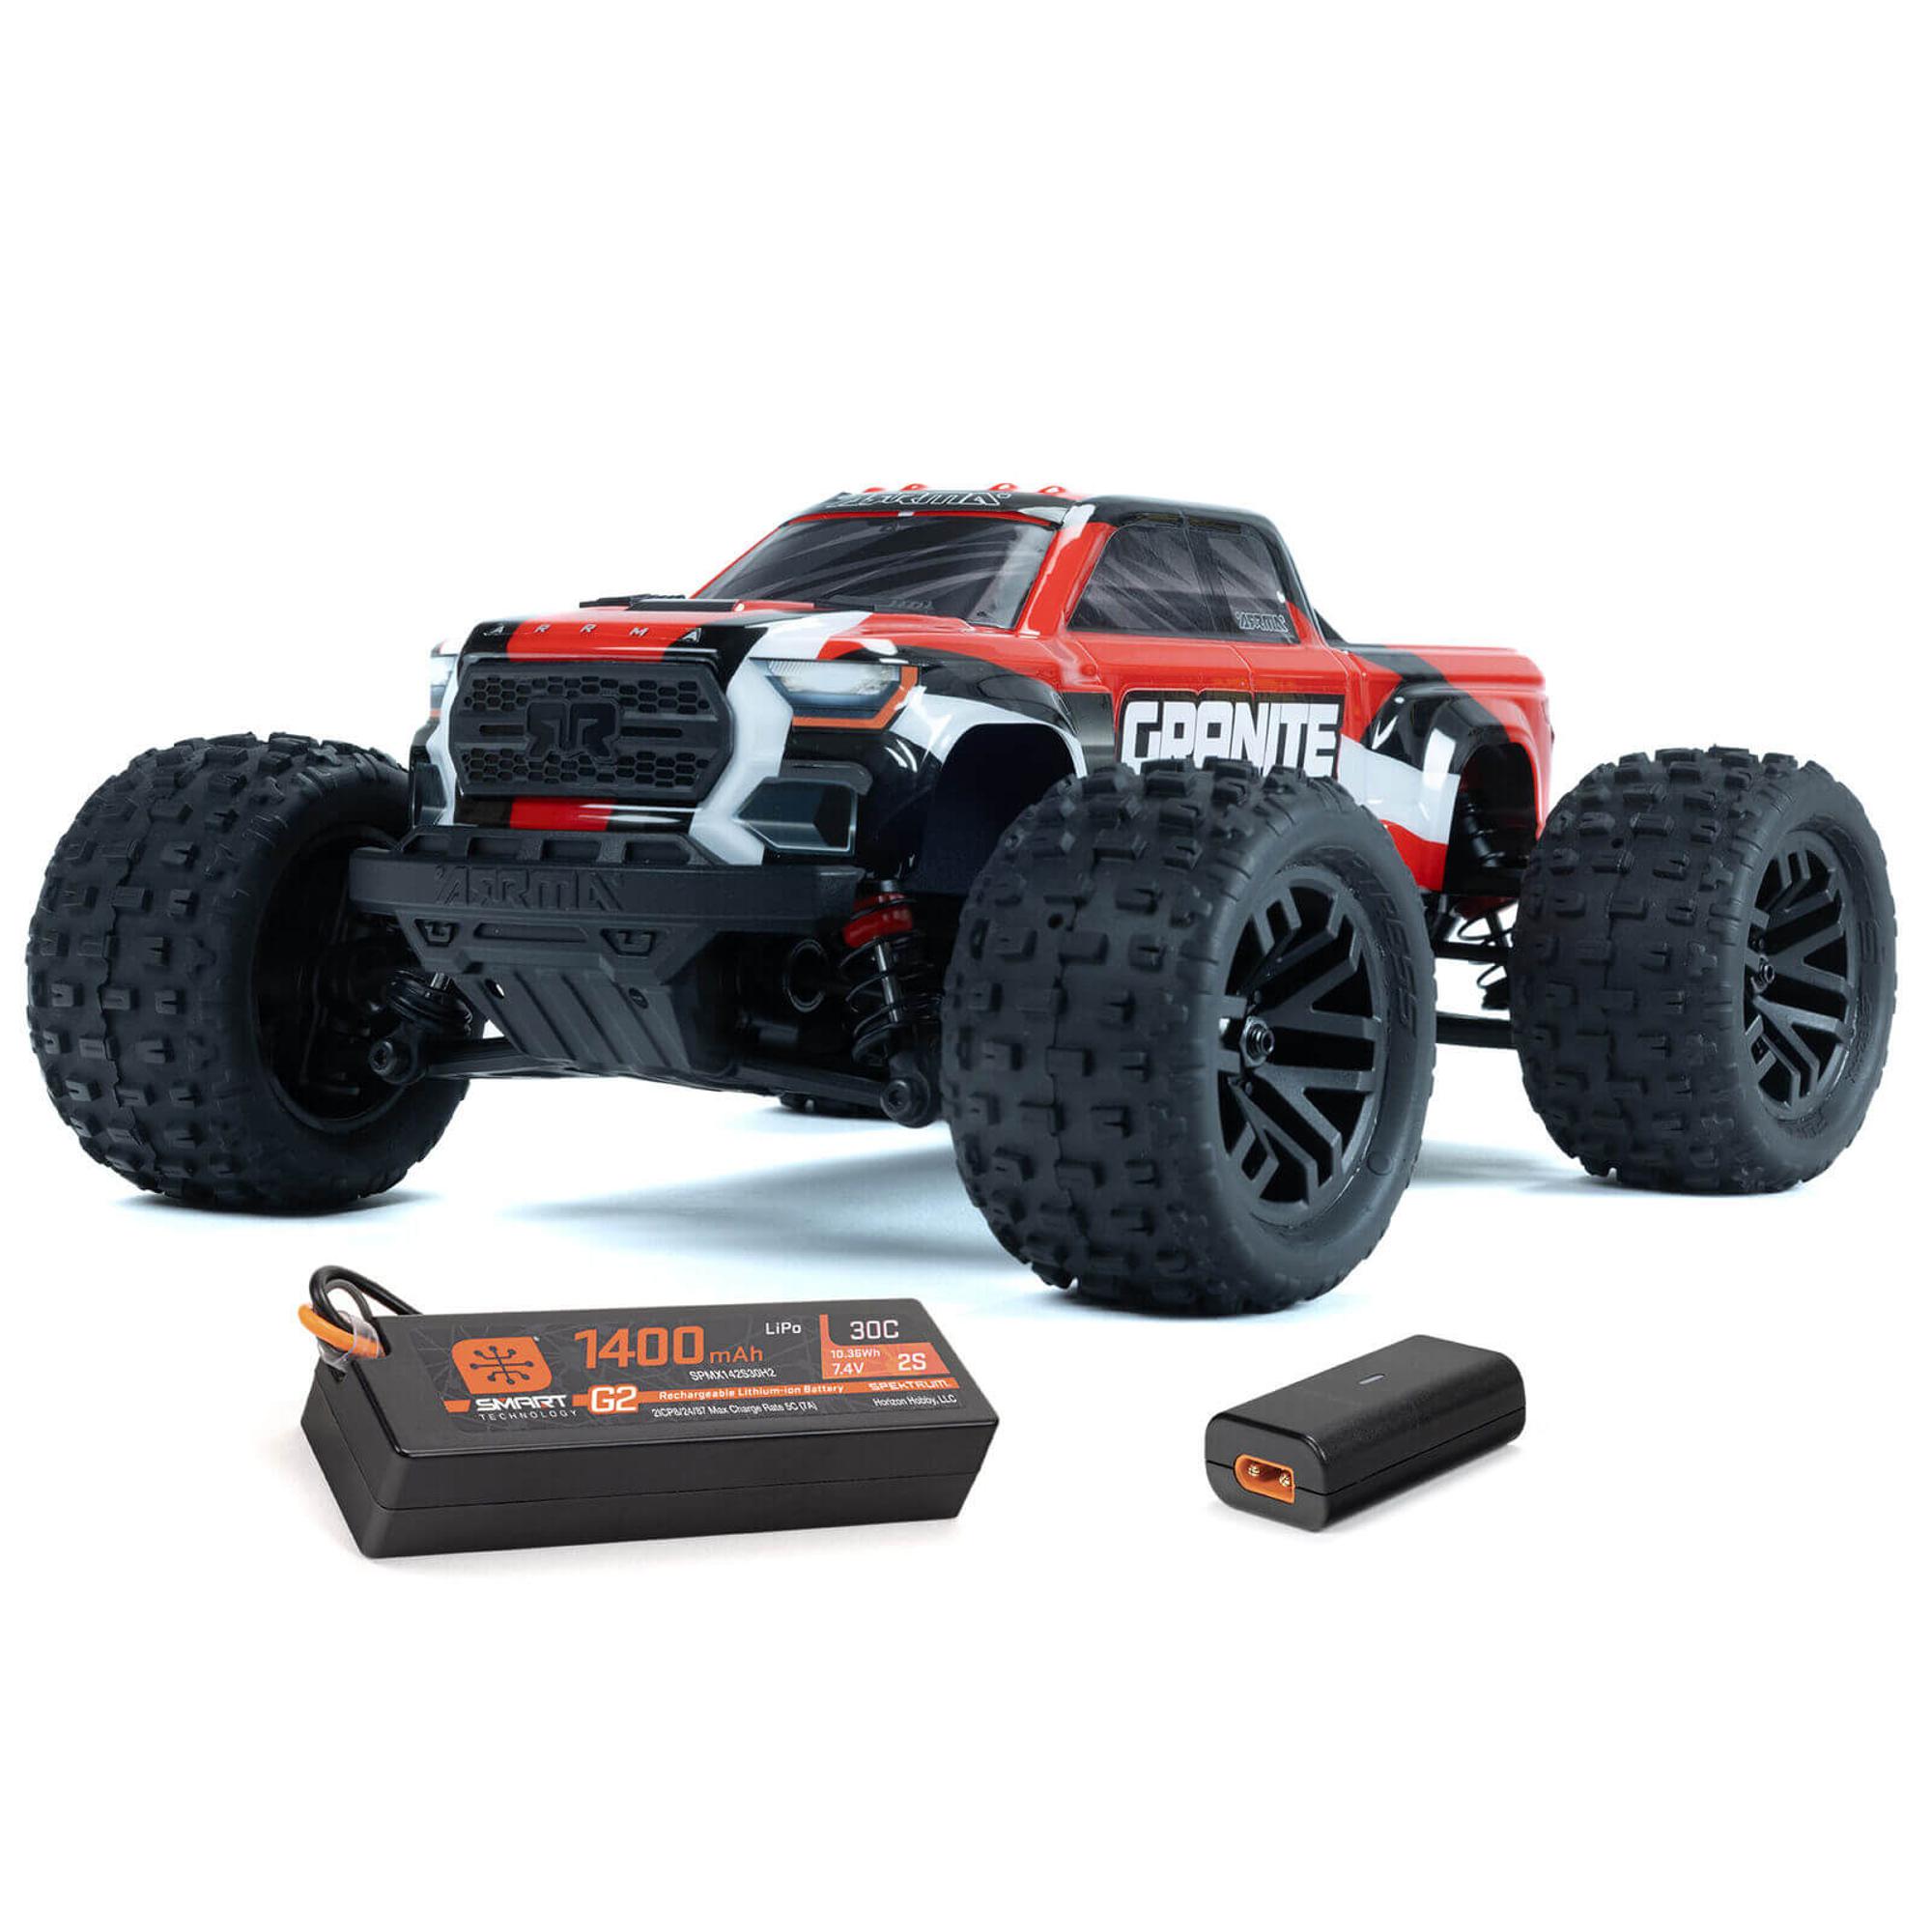 Granite Grom Mega 380 Brushed 4x4 Monster Truck RTR R/C w/ Battery, Charger (Red)